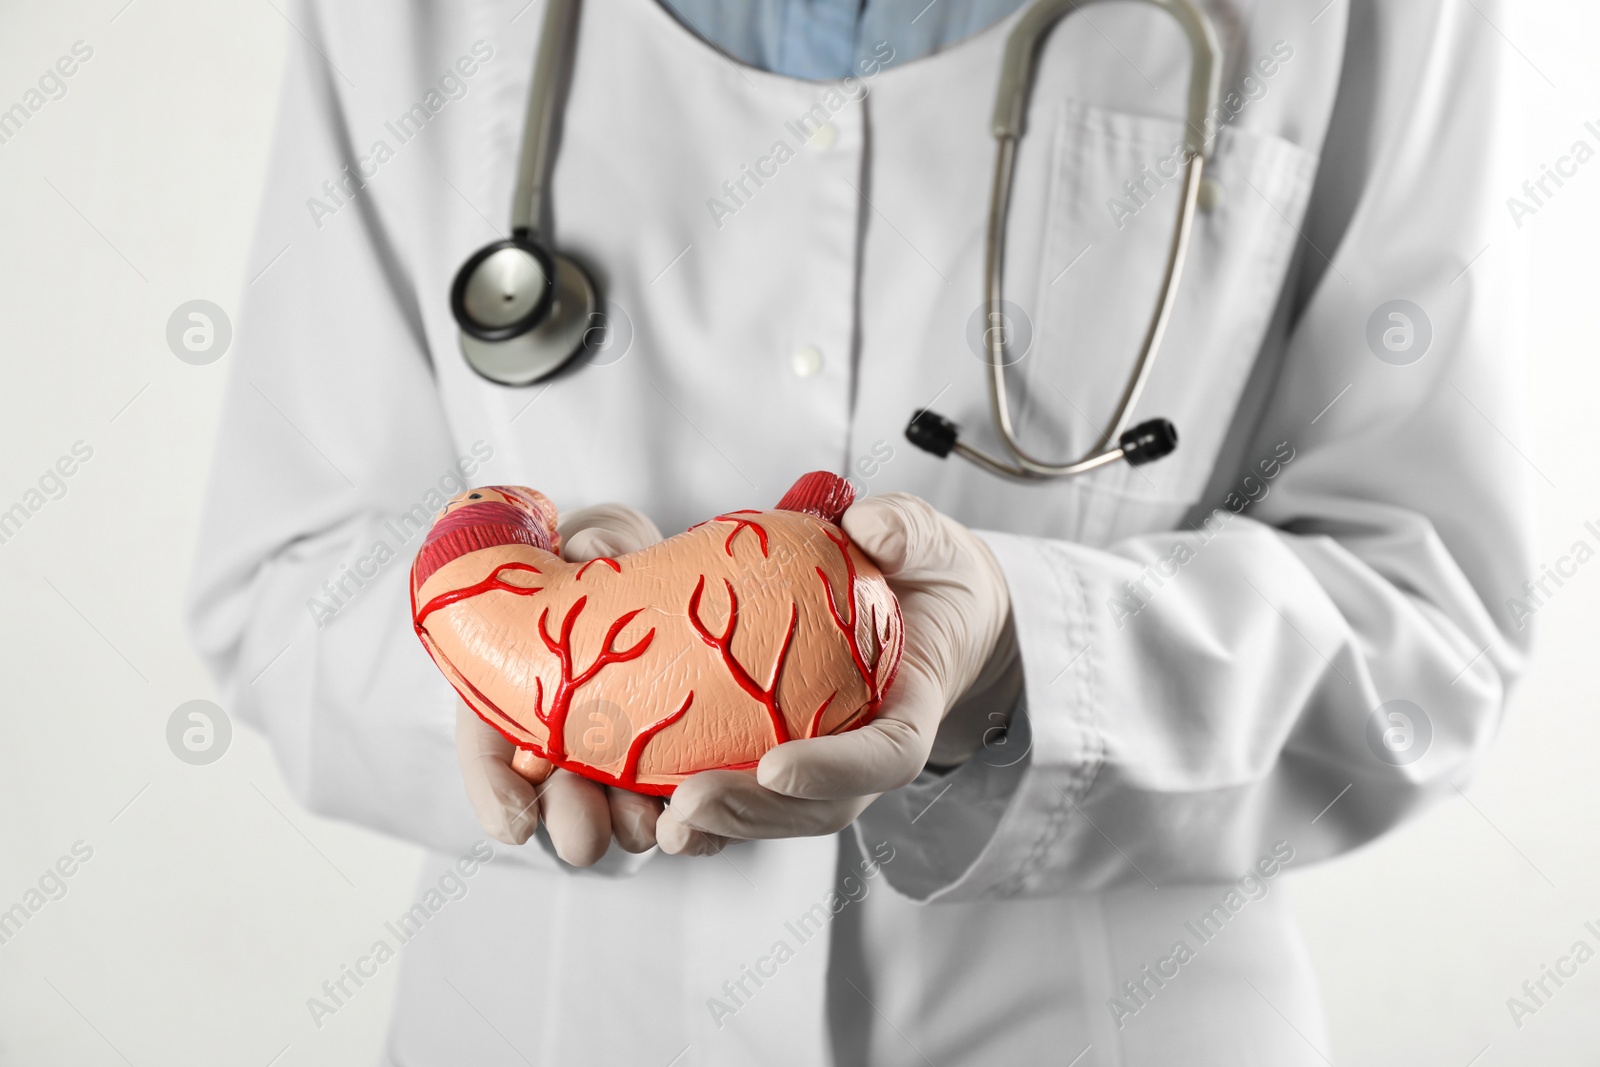 Photo of Gastroenterologist holding human stomach model on white background, closeup